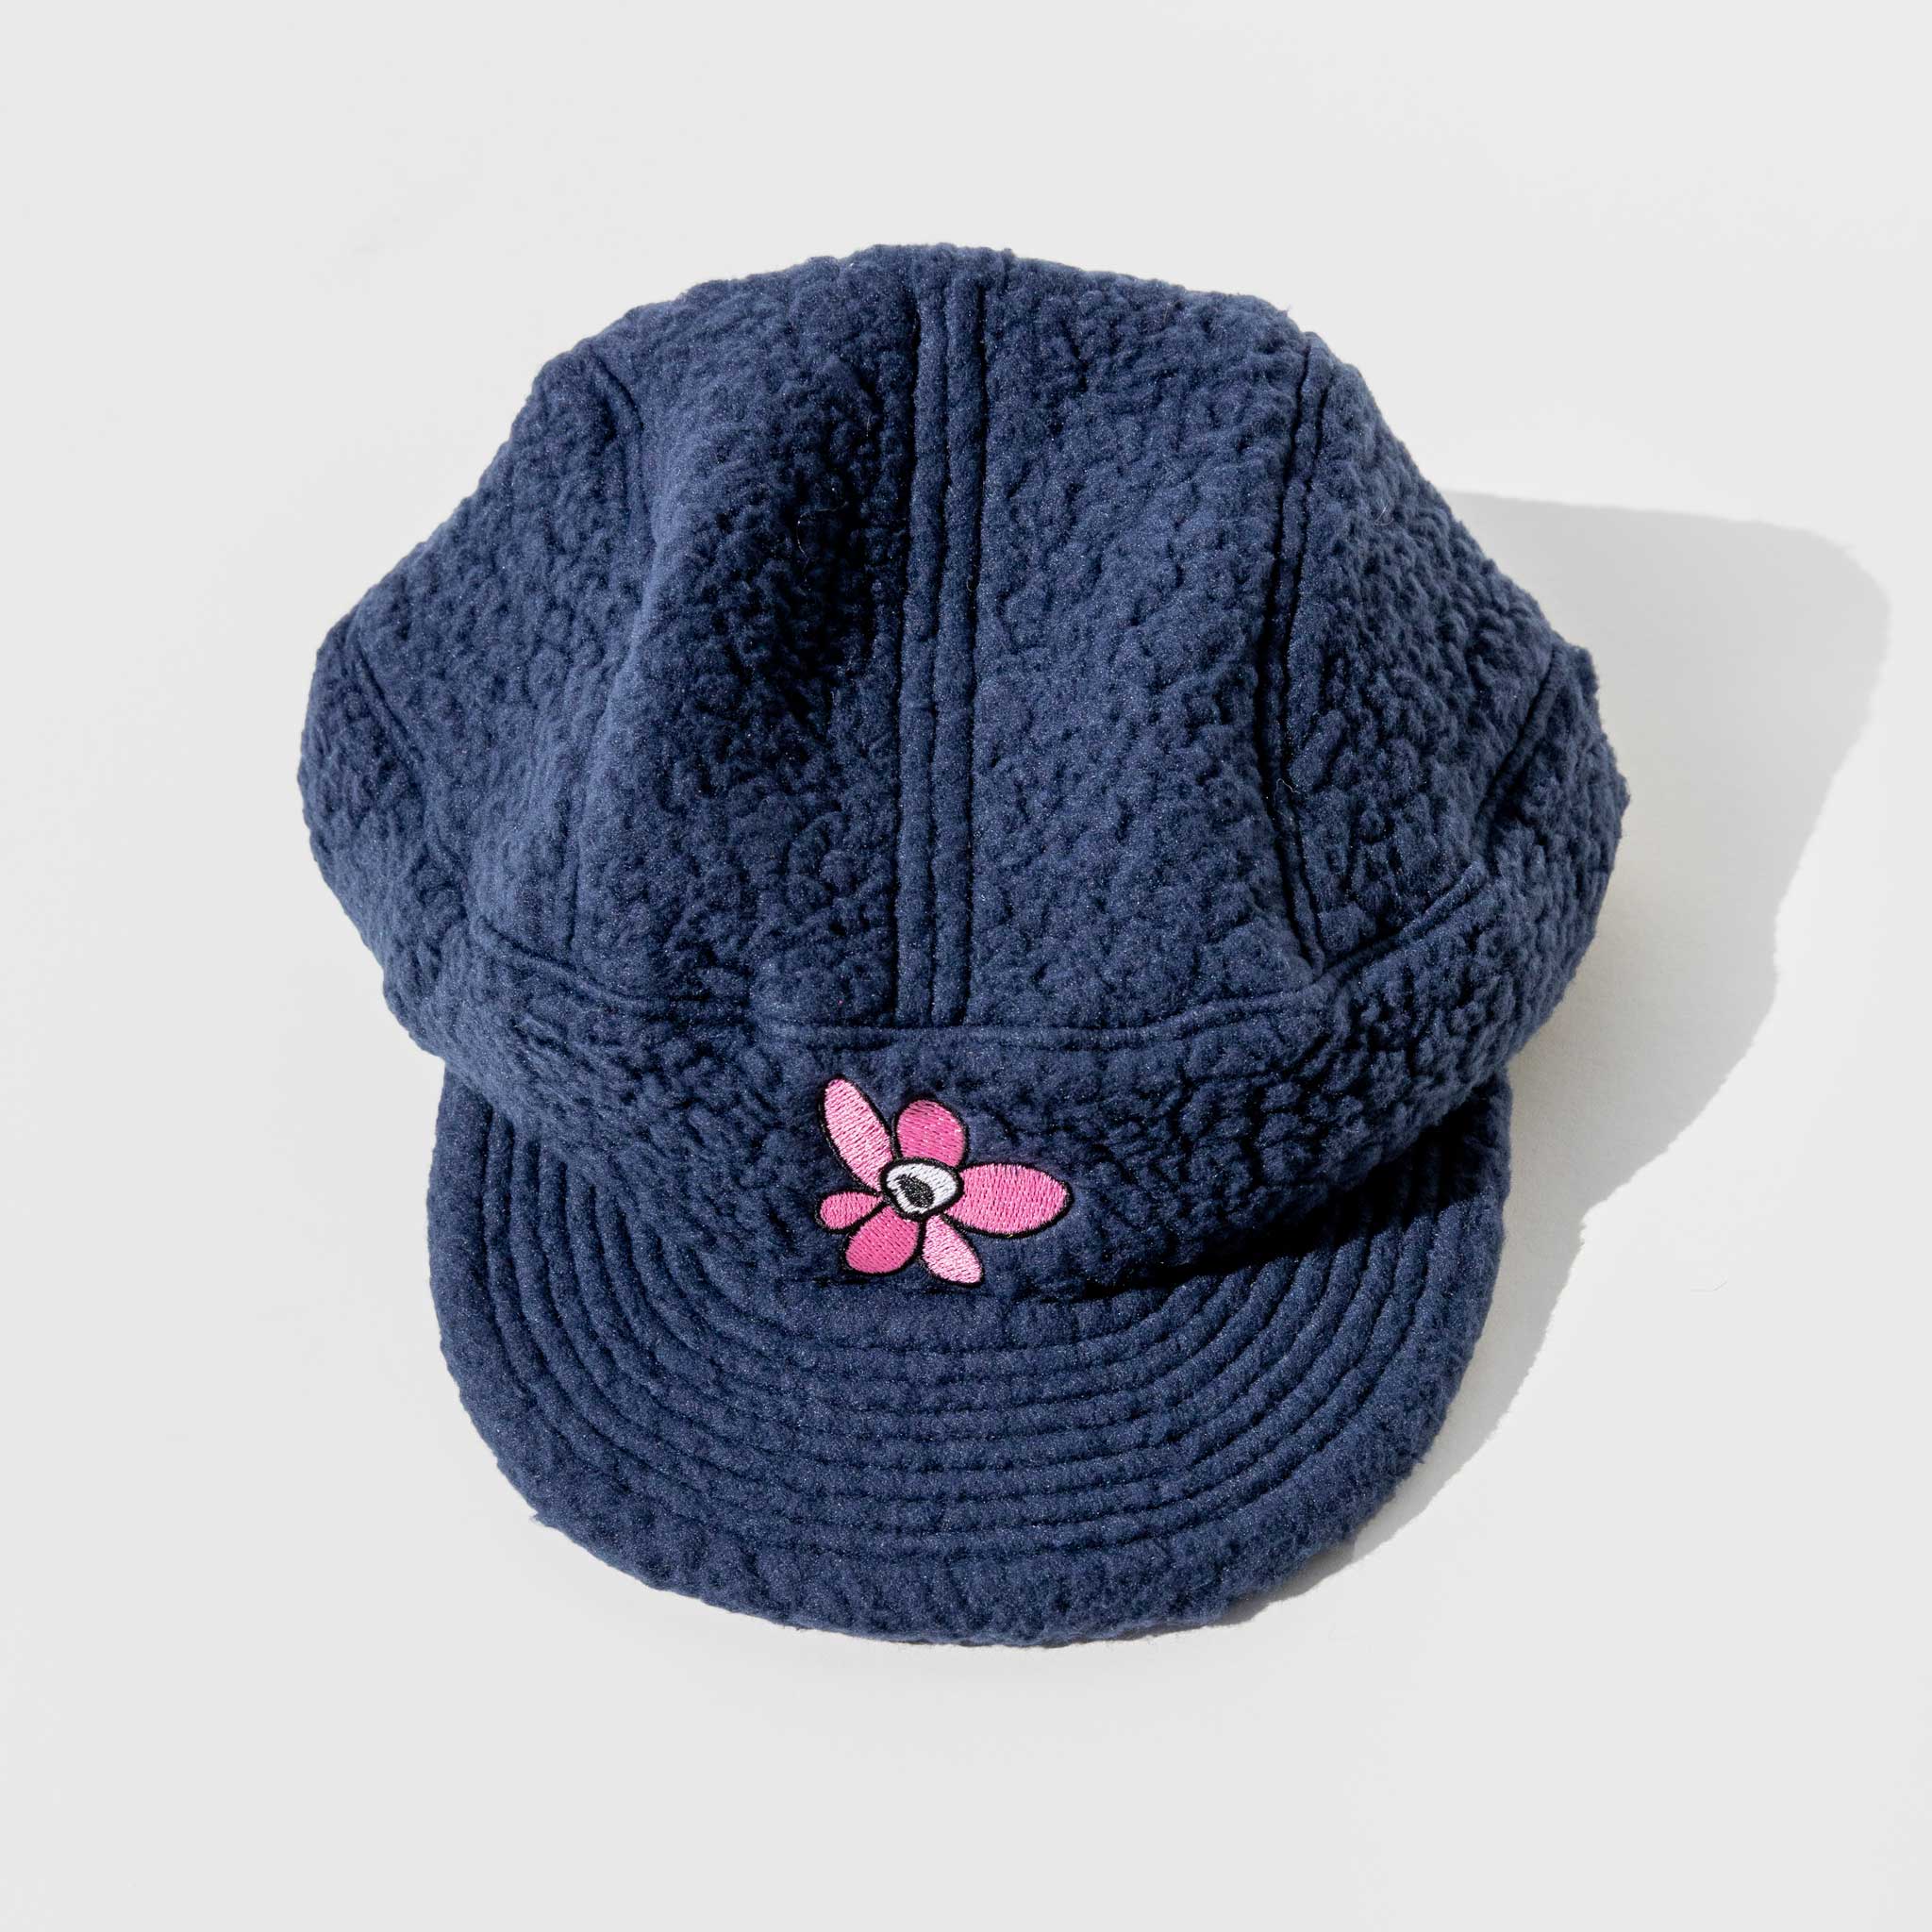 Close flat photo of the Recycled Shearling 4 Panel Cap - Navy.